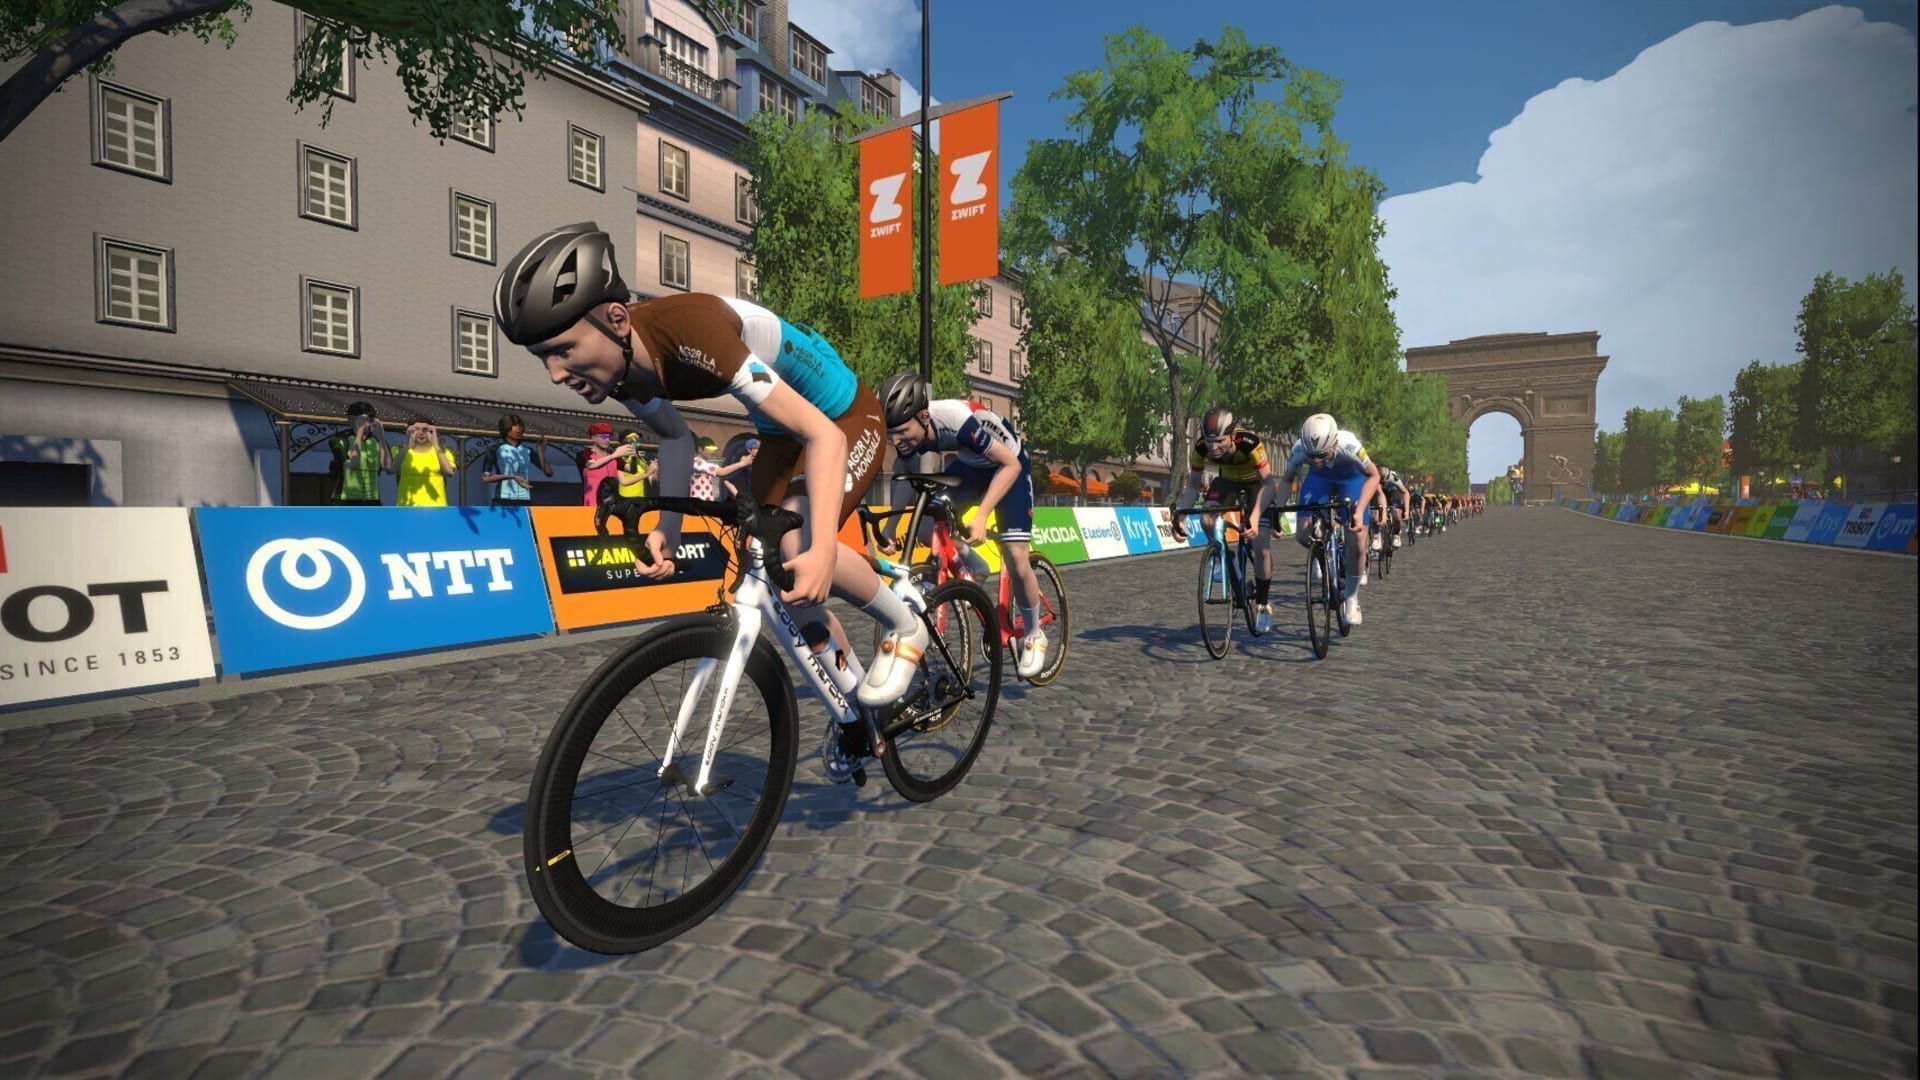 The First Virtual Tour de France Offers a Lesson in Harnessing Chaos